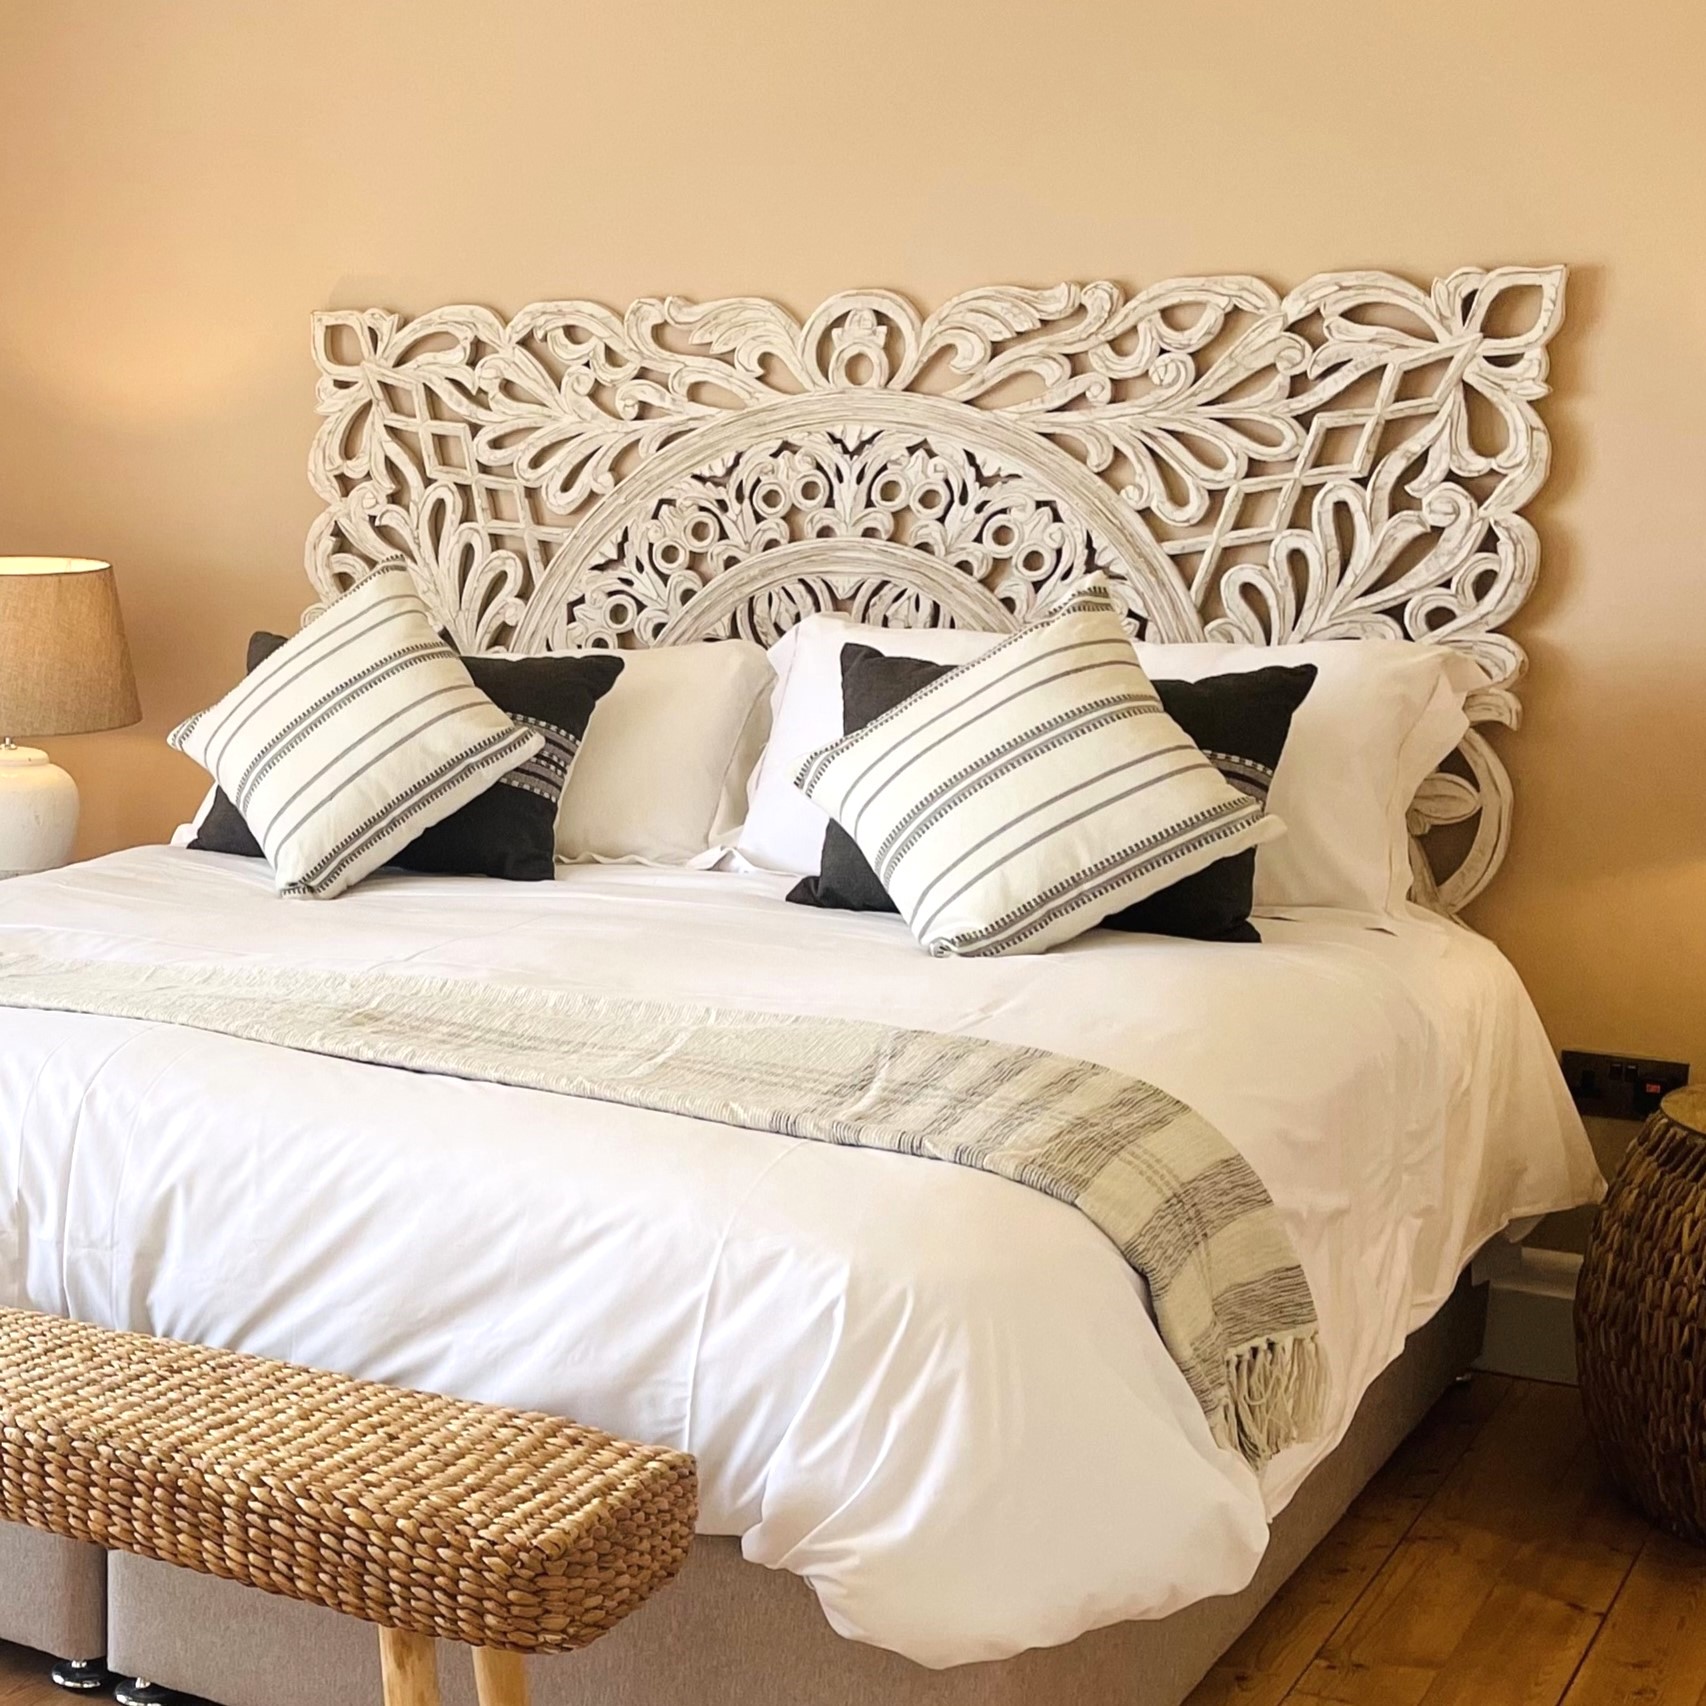 Carved Wooden Headboard White on Bed in bedroom setting